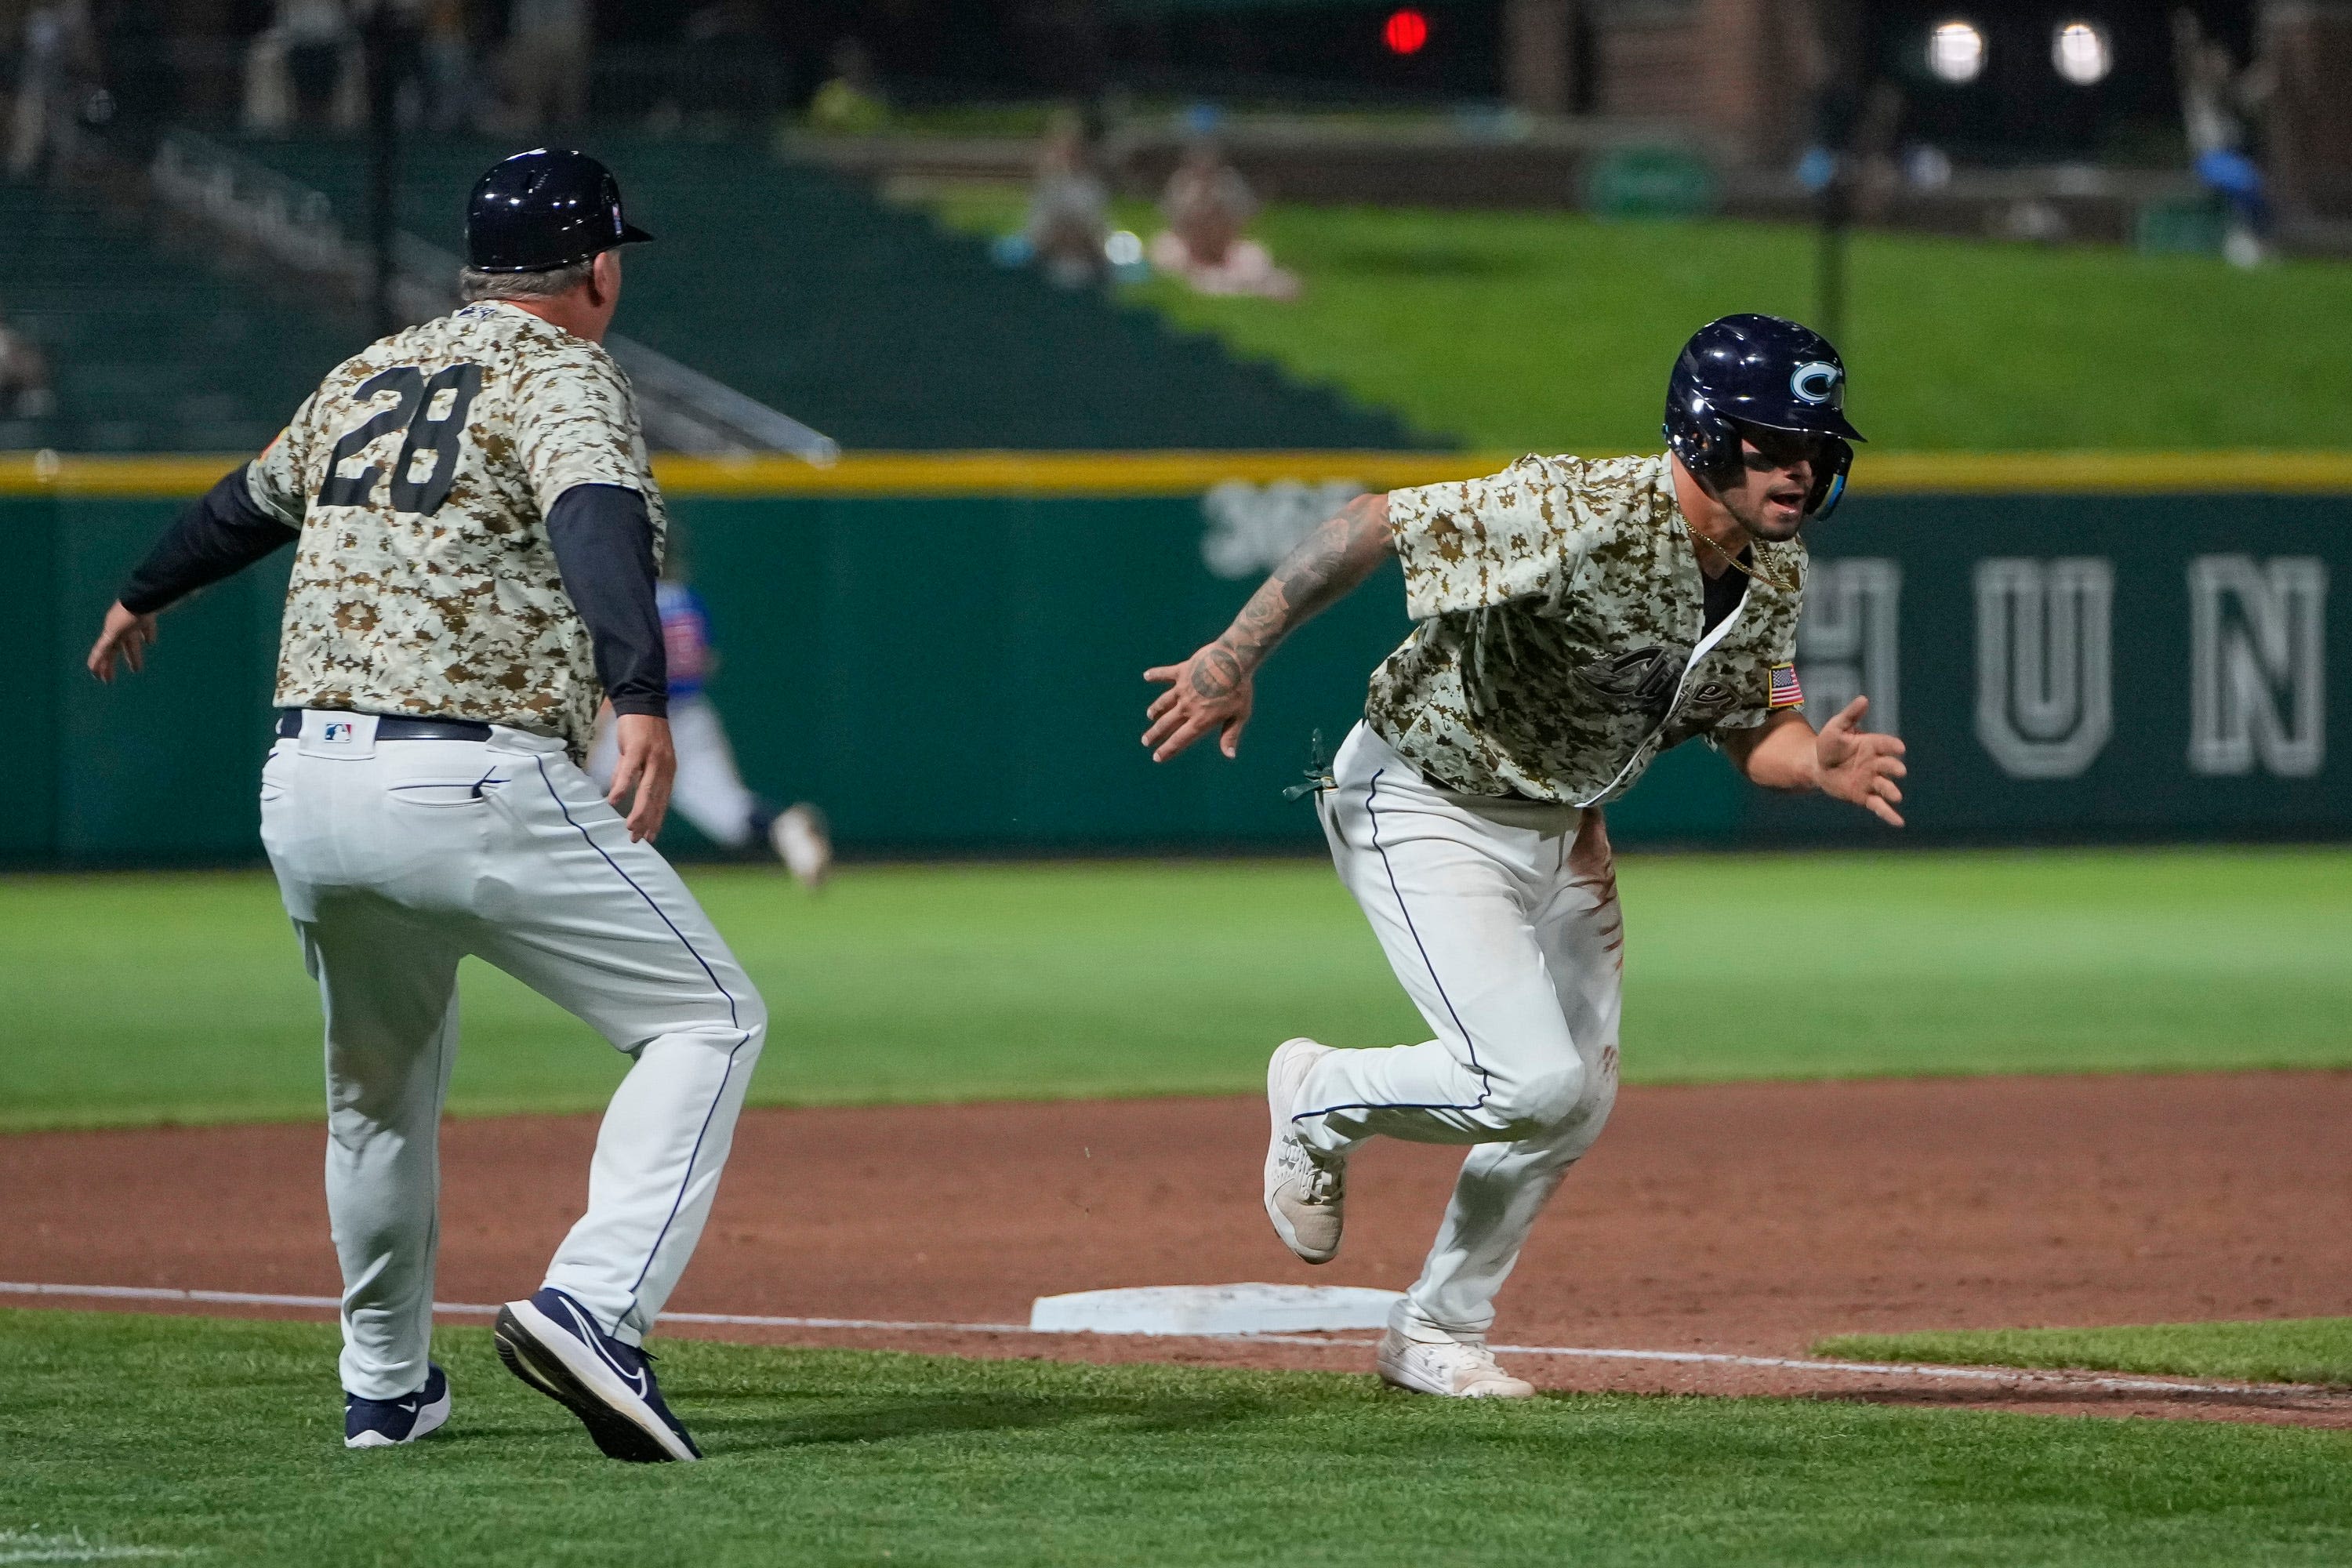 Columbus Clippers get controversial walk-off win over Toledo Mud Hens with a run in 10th